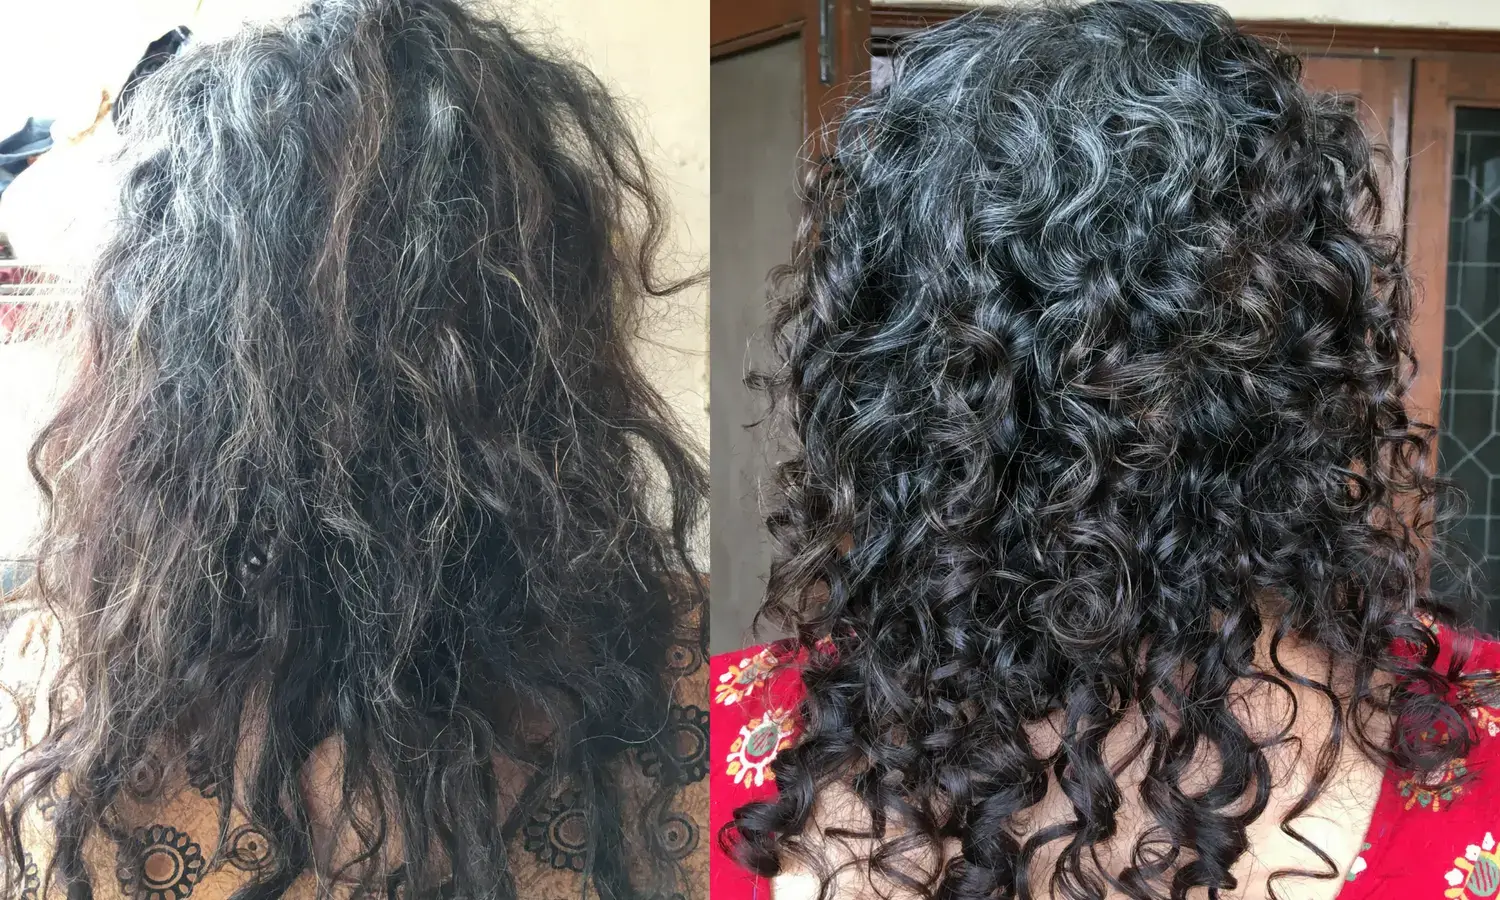 Before and after results of curly hair styling.